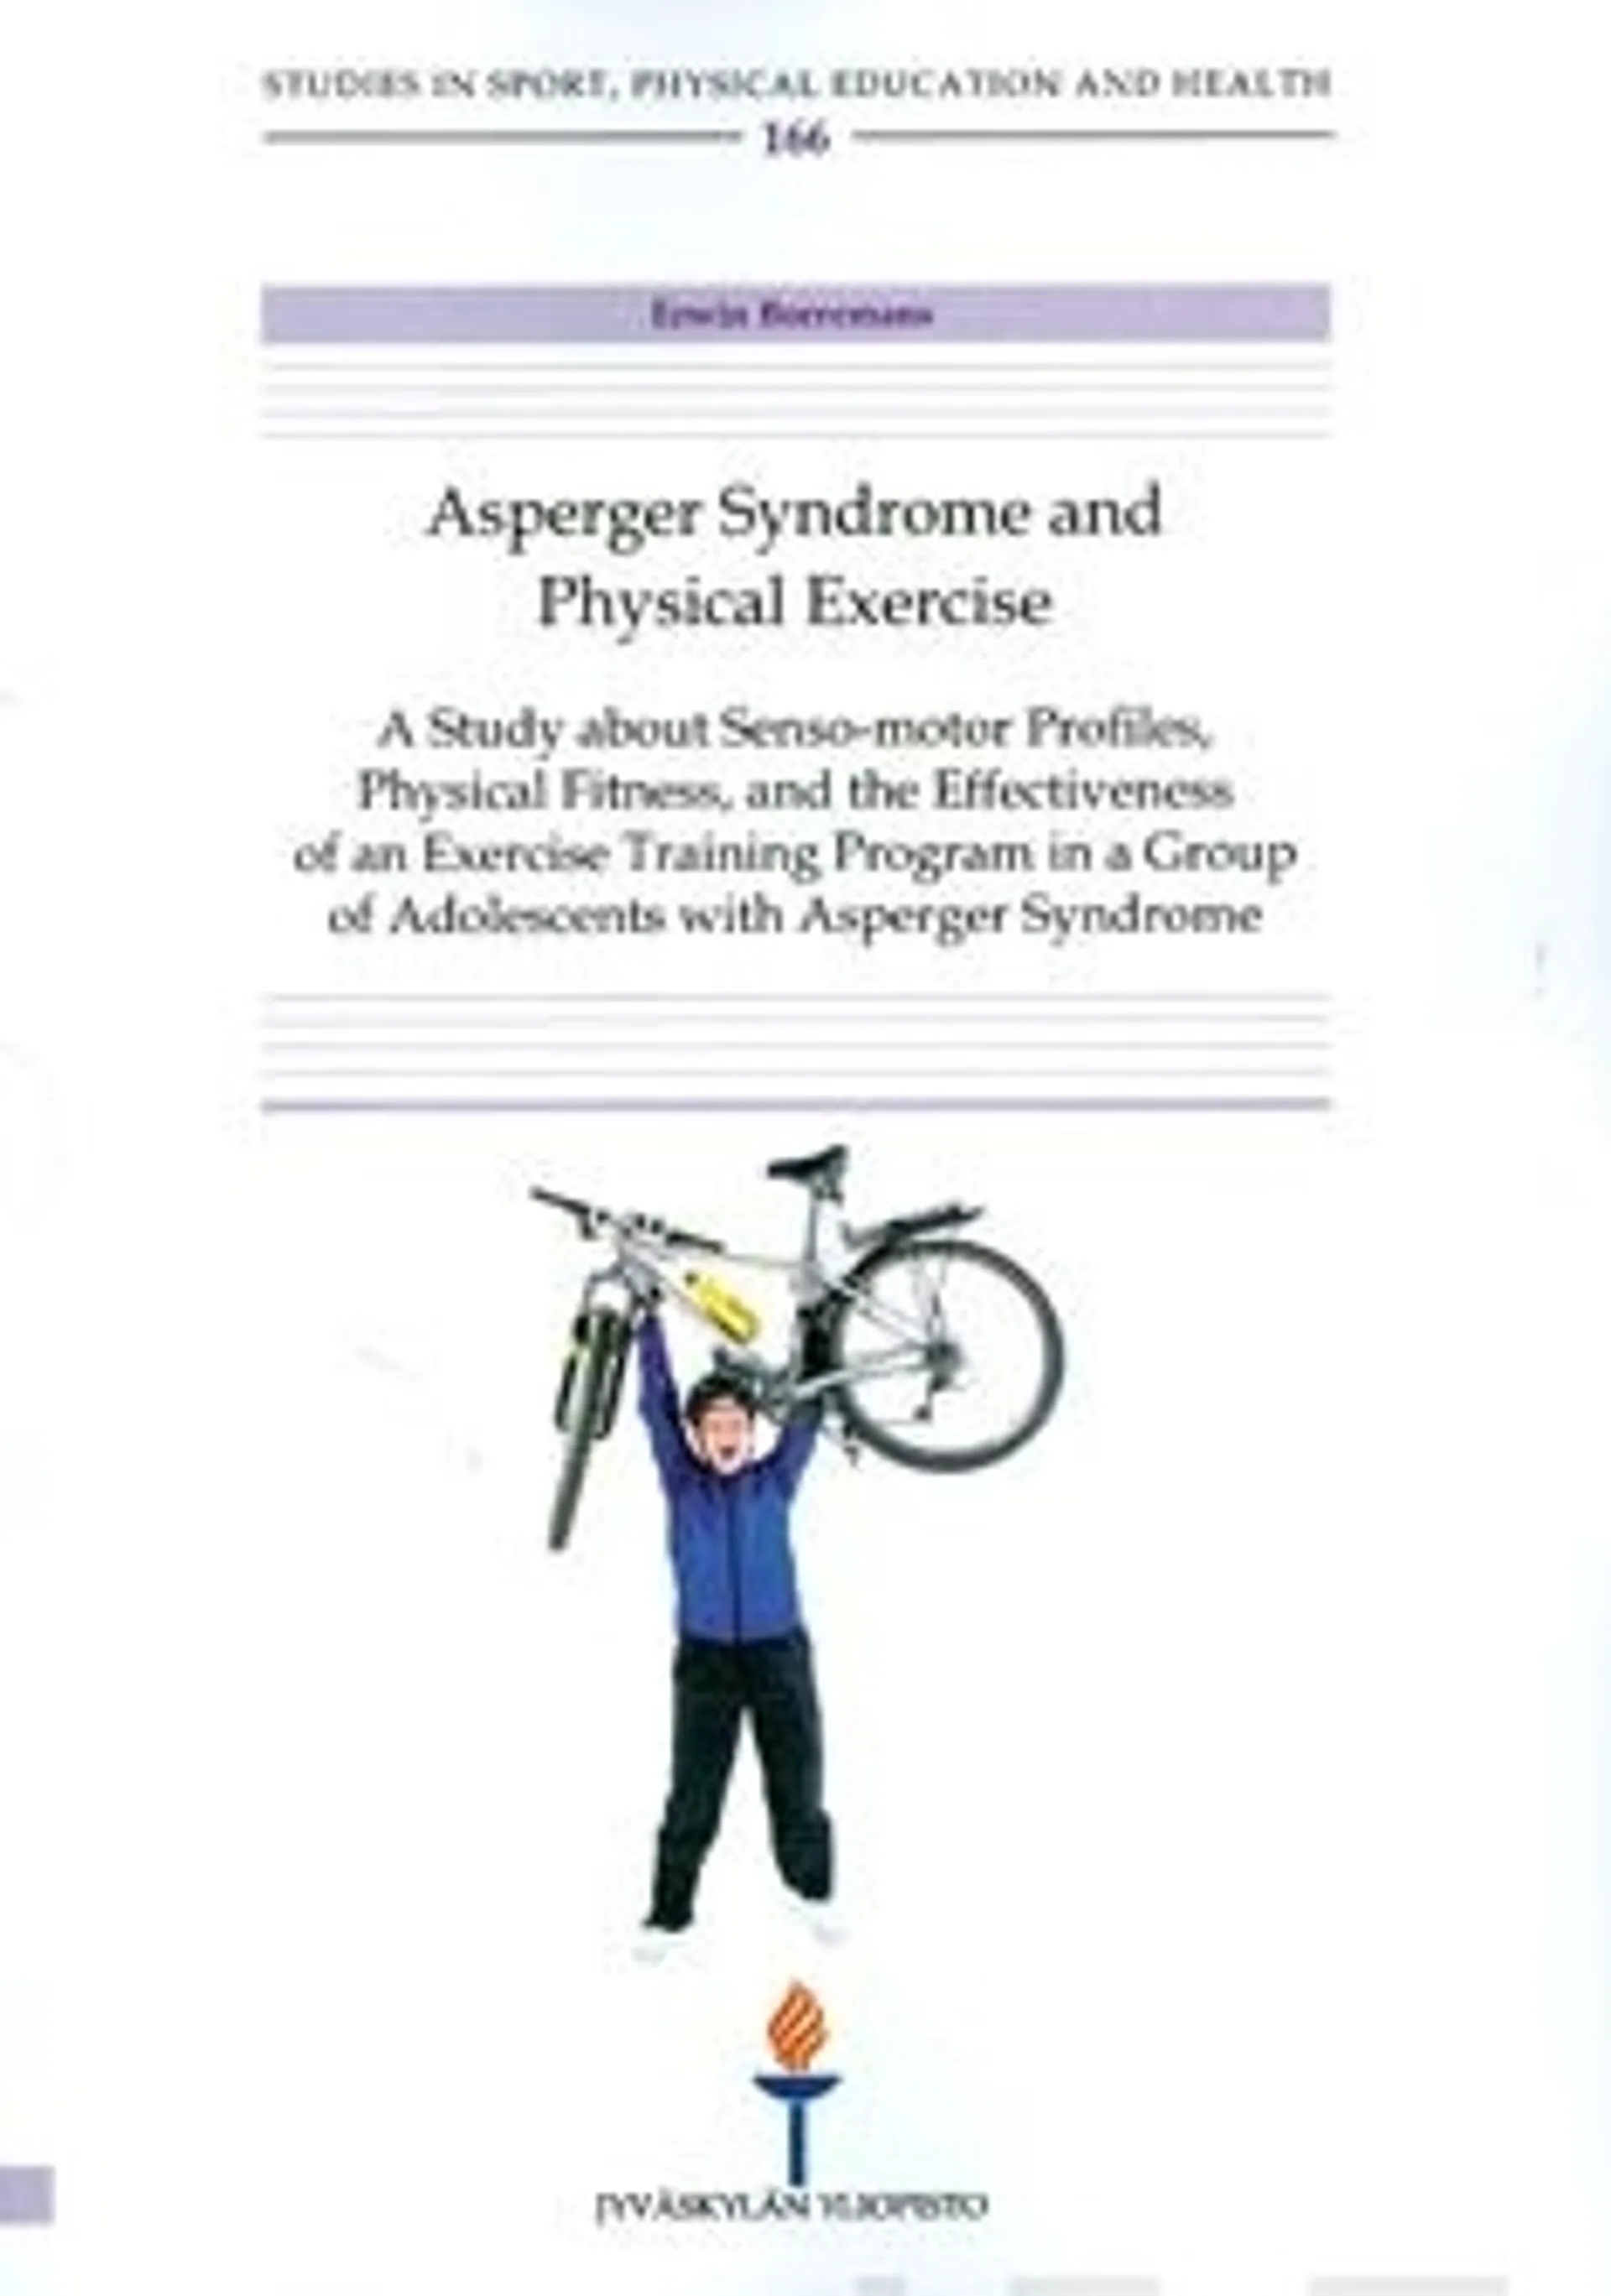 Borremans, Asperger syndrome and physical exercise